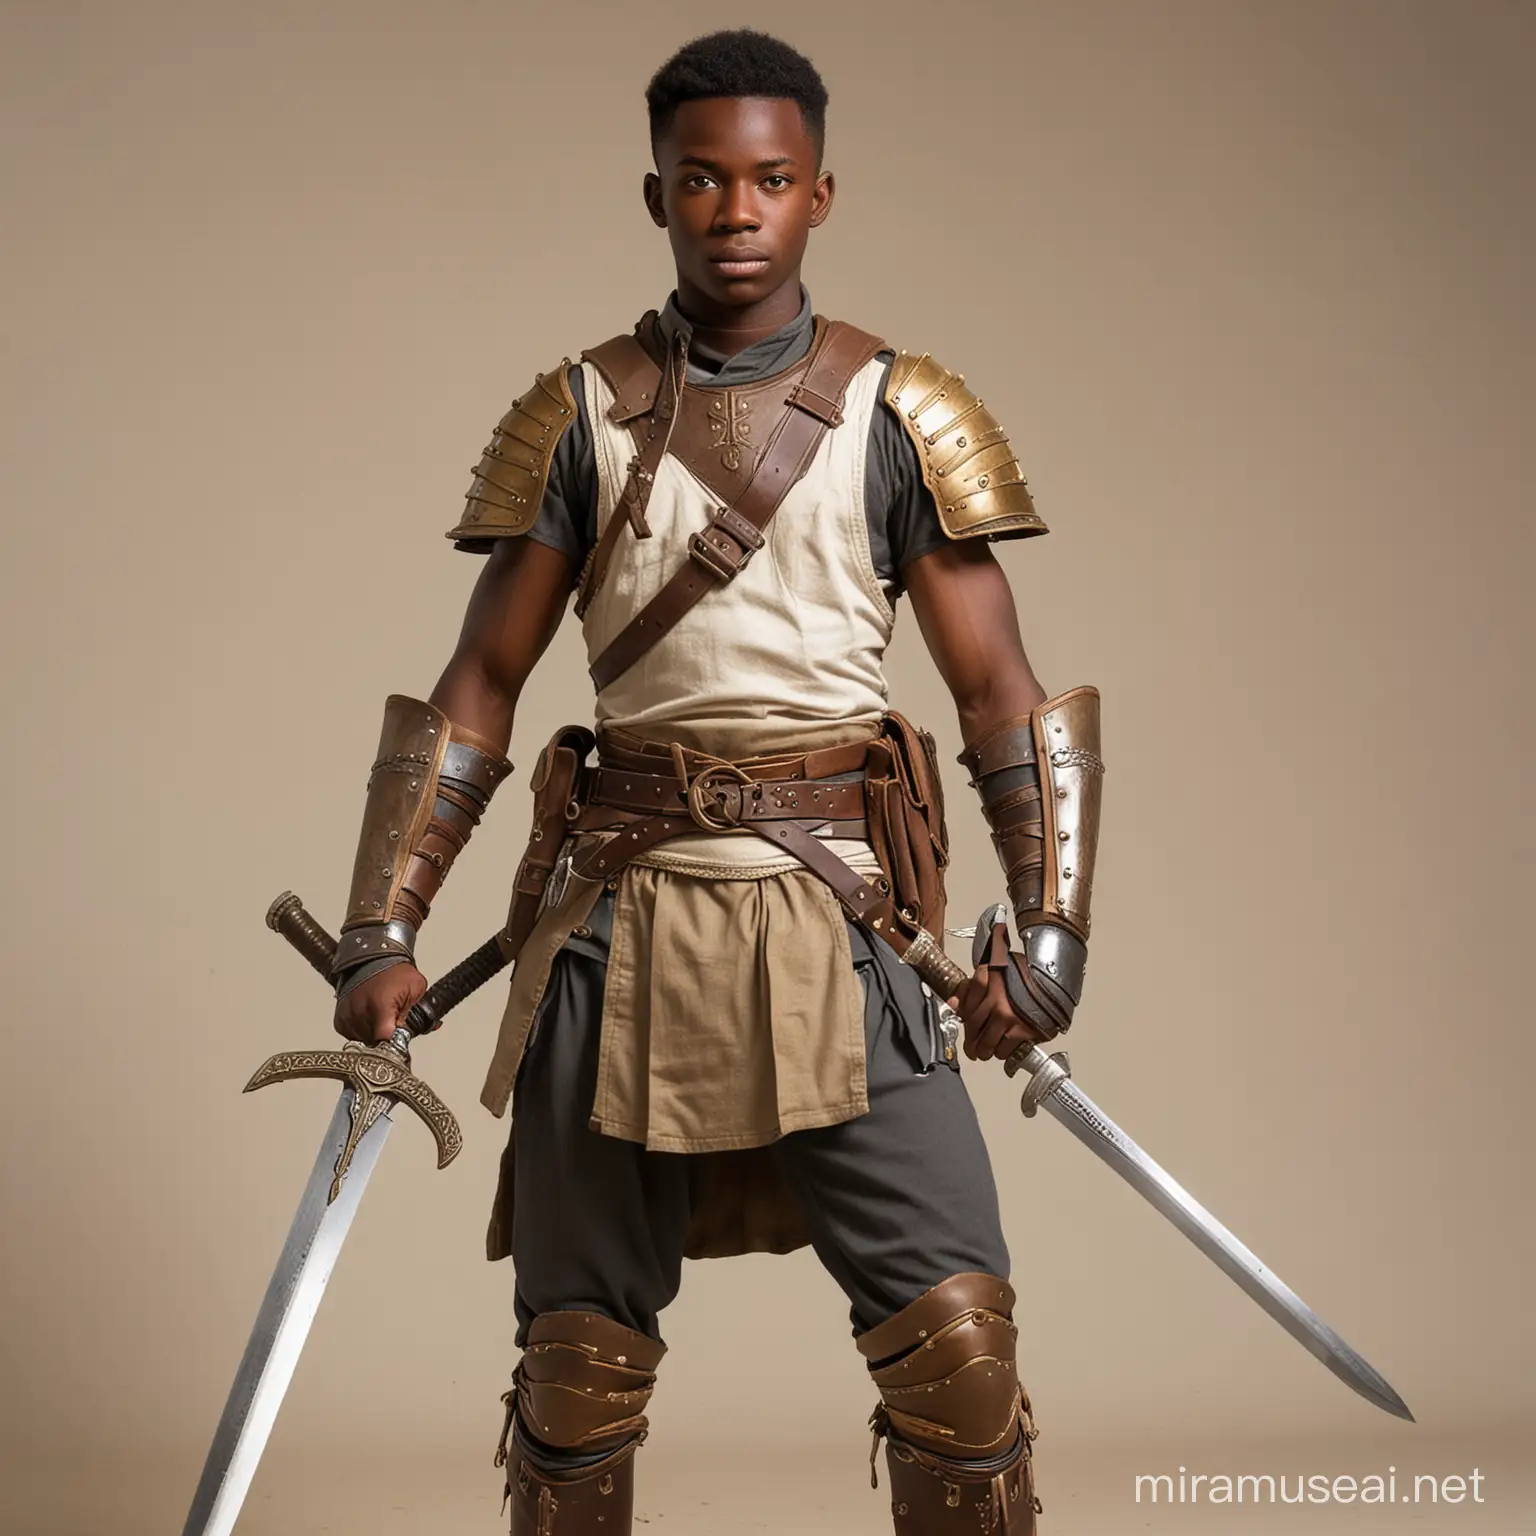 African Swordfighter 18 Years Old Posed in Full Body